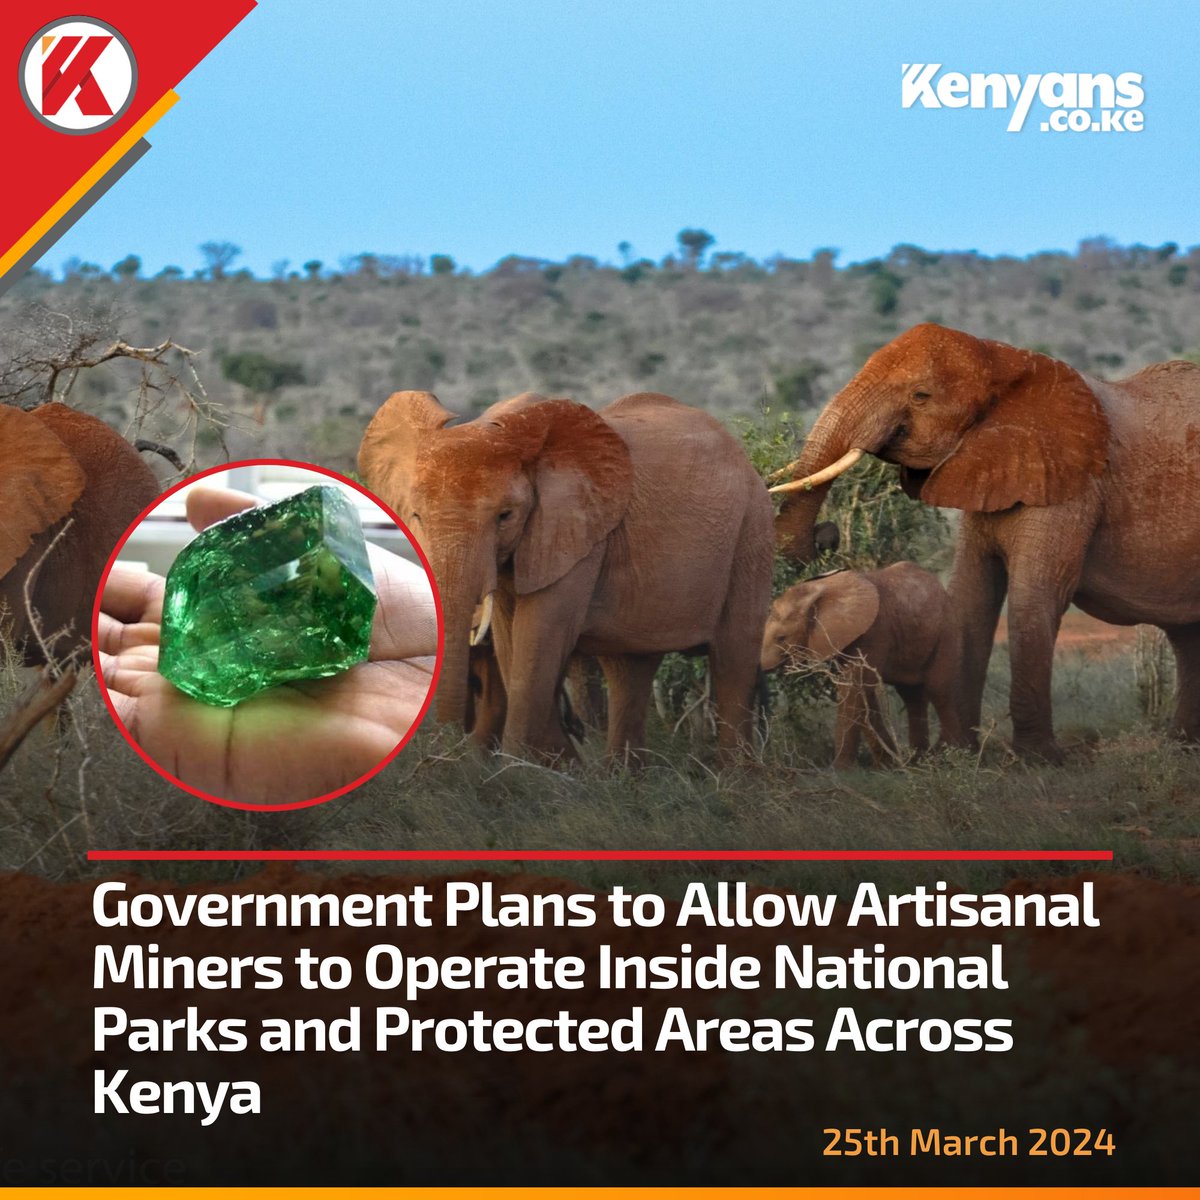 Government plans to allow artisanal miners to operate inside national parks and protected areas across Kenya